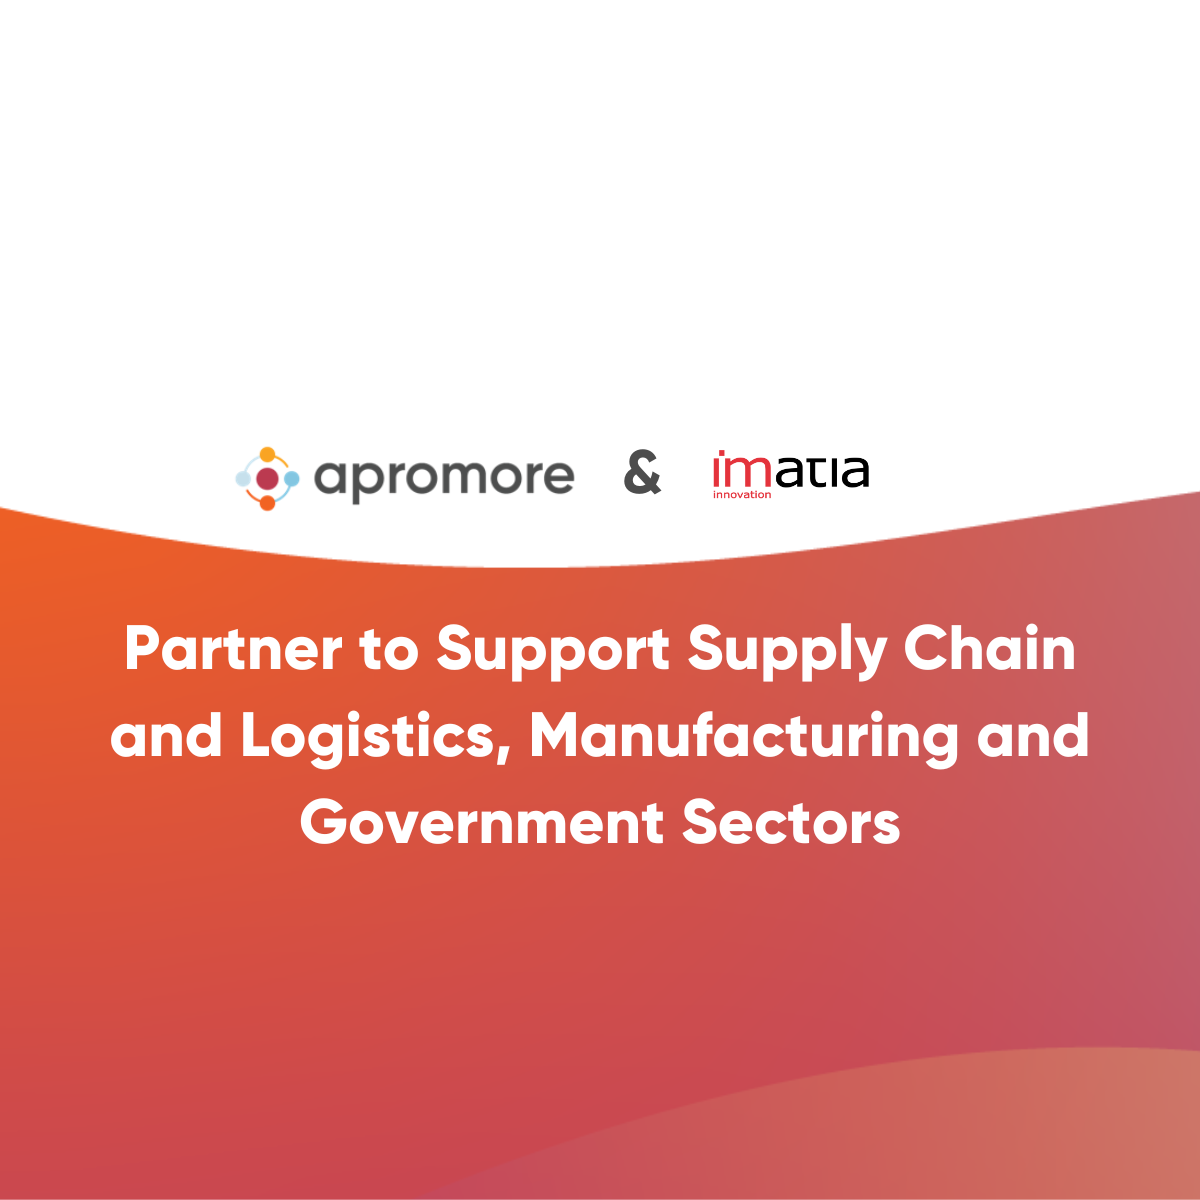 Apromore and Imatia Partner to Support Supply Chain and Logistics, Manufacturing and Government Sectors